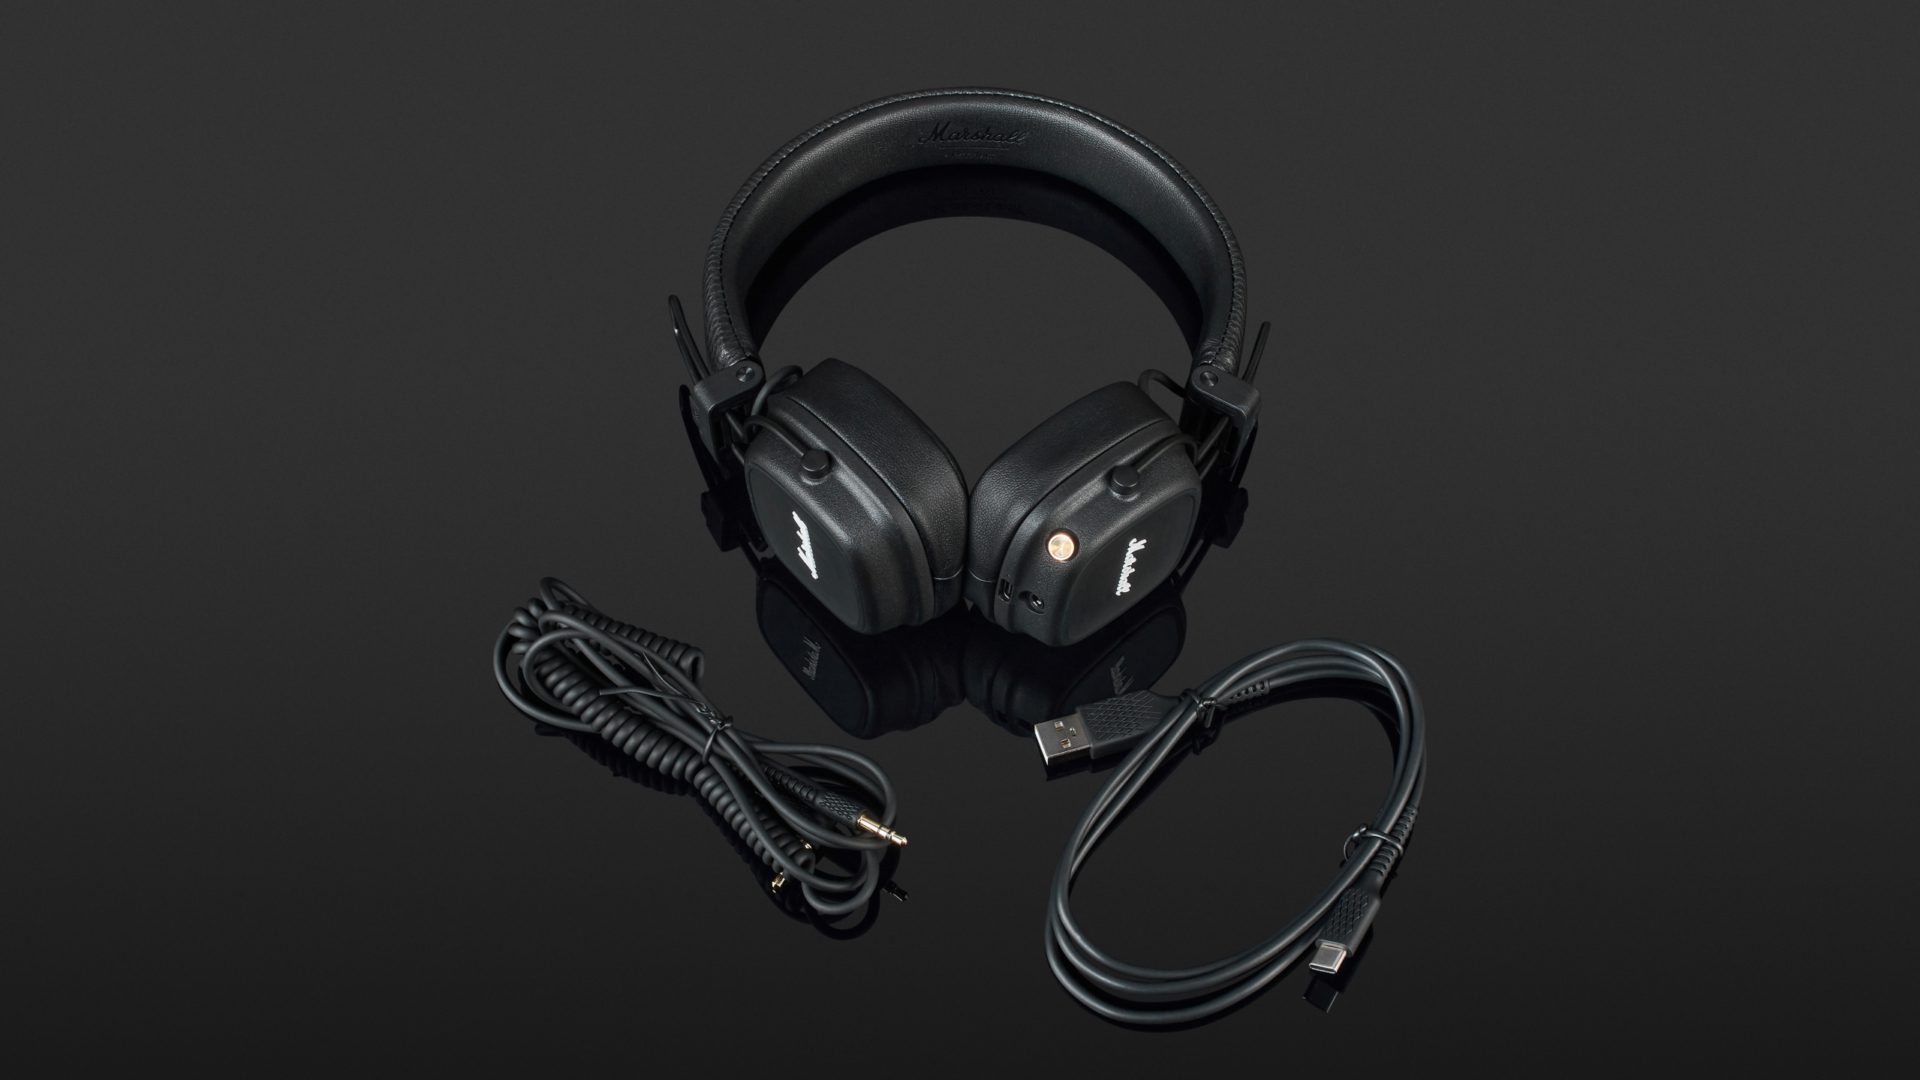 Marshall Major IV Review: Pretty Basic On-Ear Headphones But 80 HOURS OF  BATTERY LIFE?! 